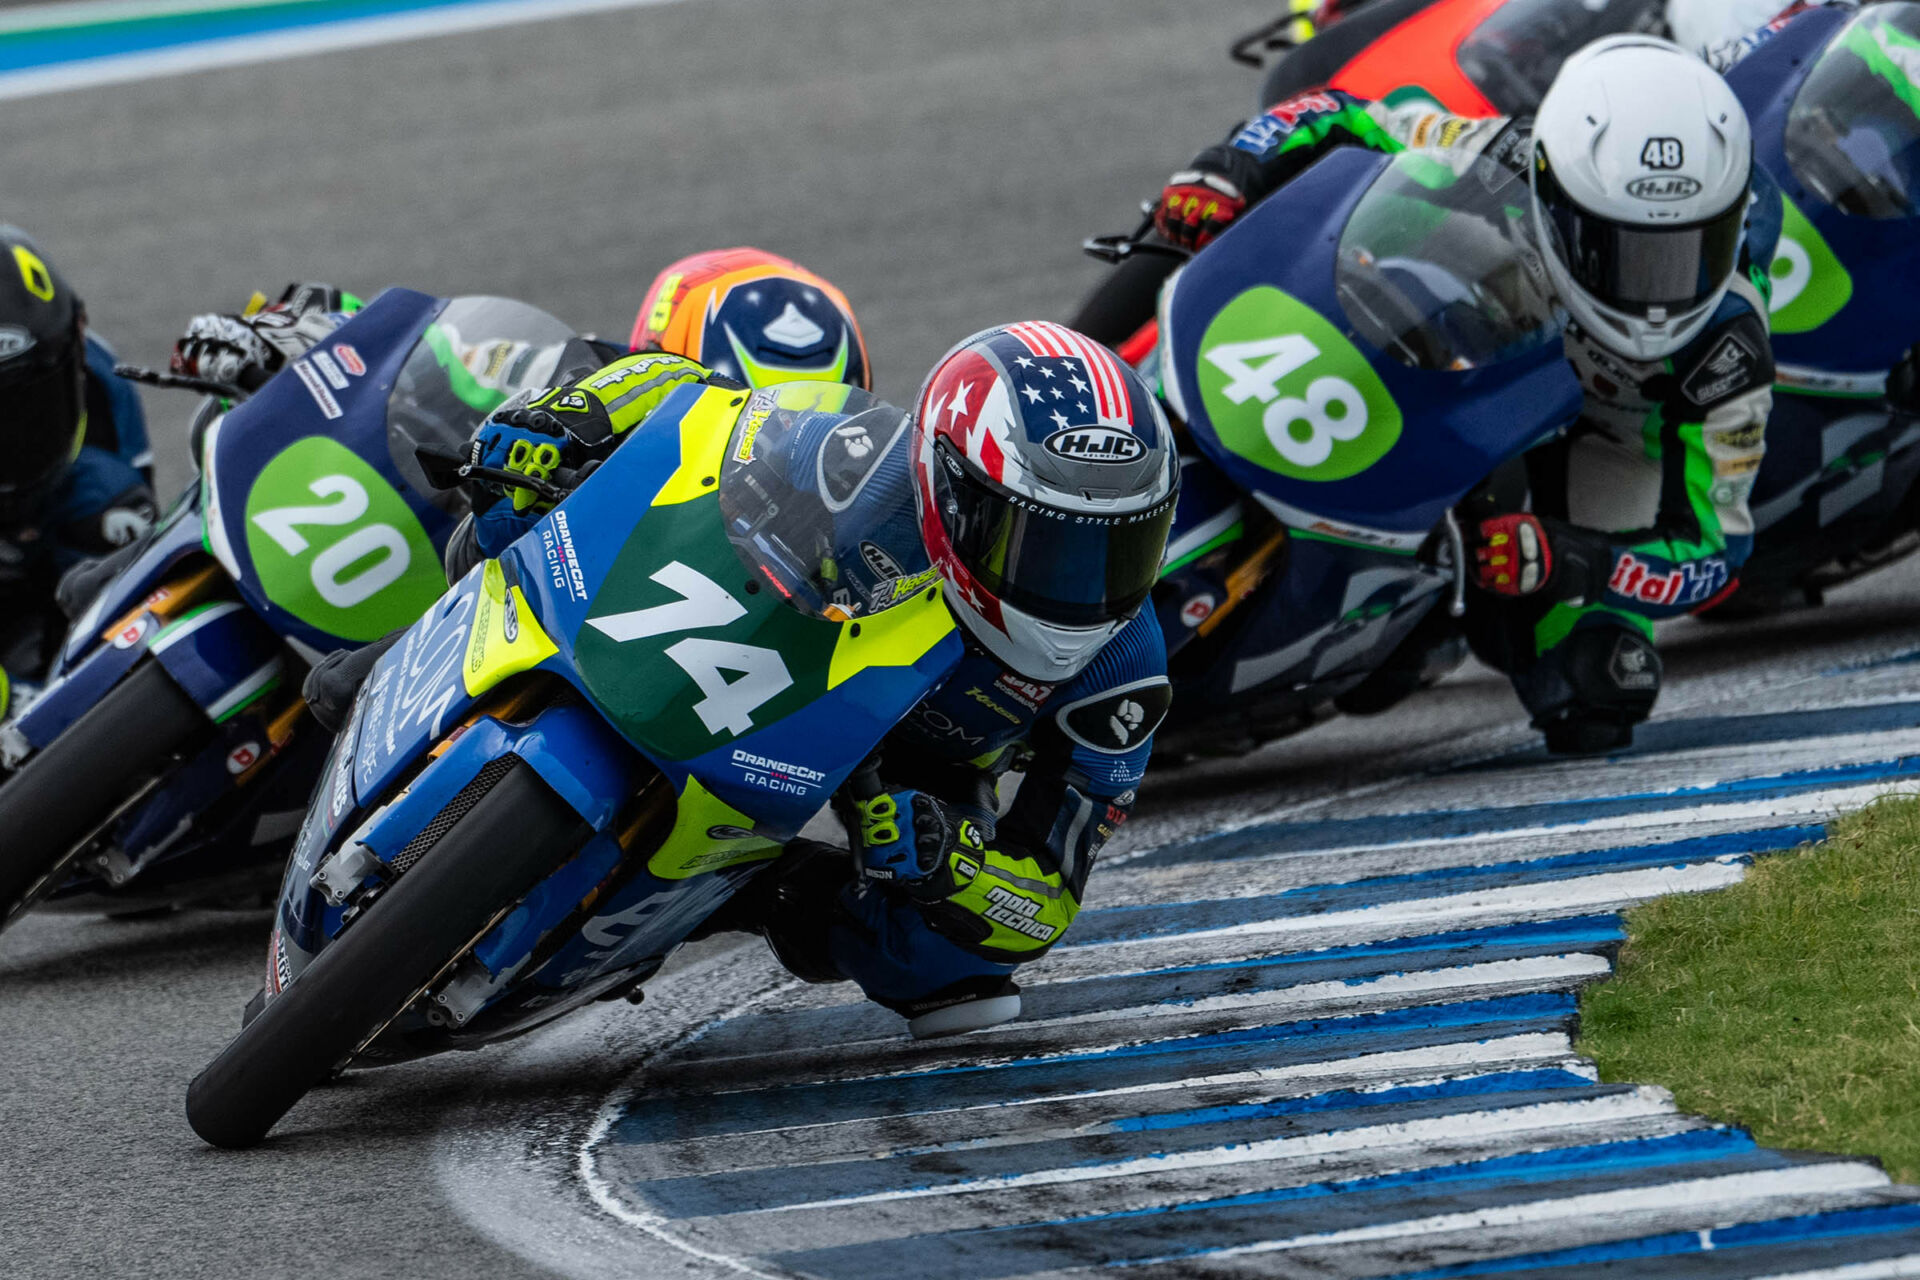 American Kensei Matsudaira with Another Top 10 Finish in ESBK Moto4 Race at Jerez
